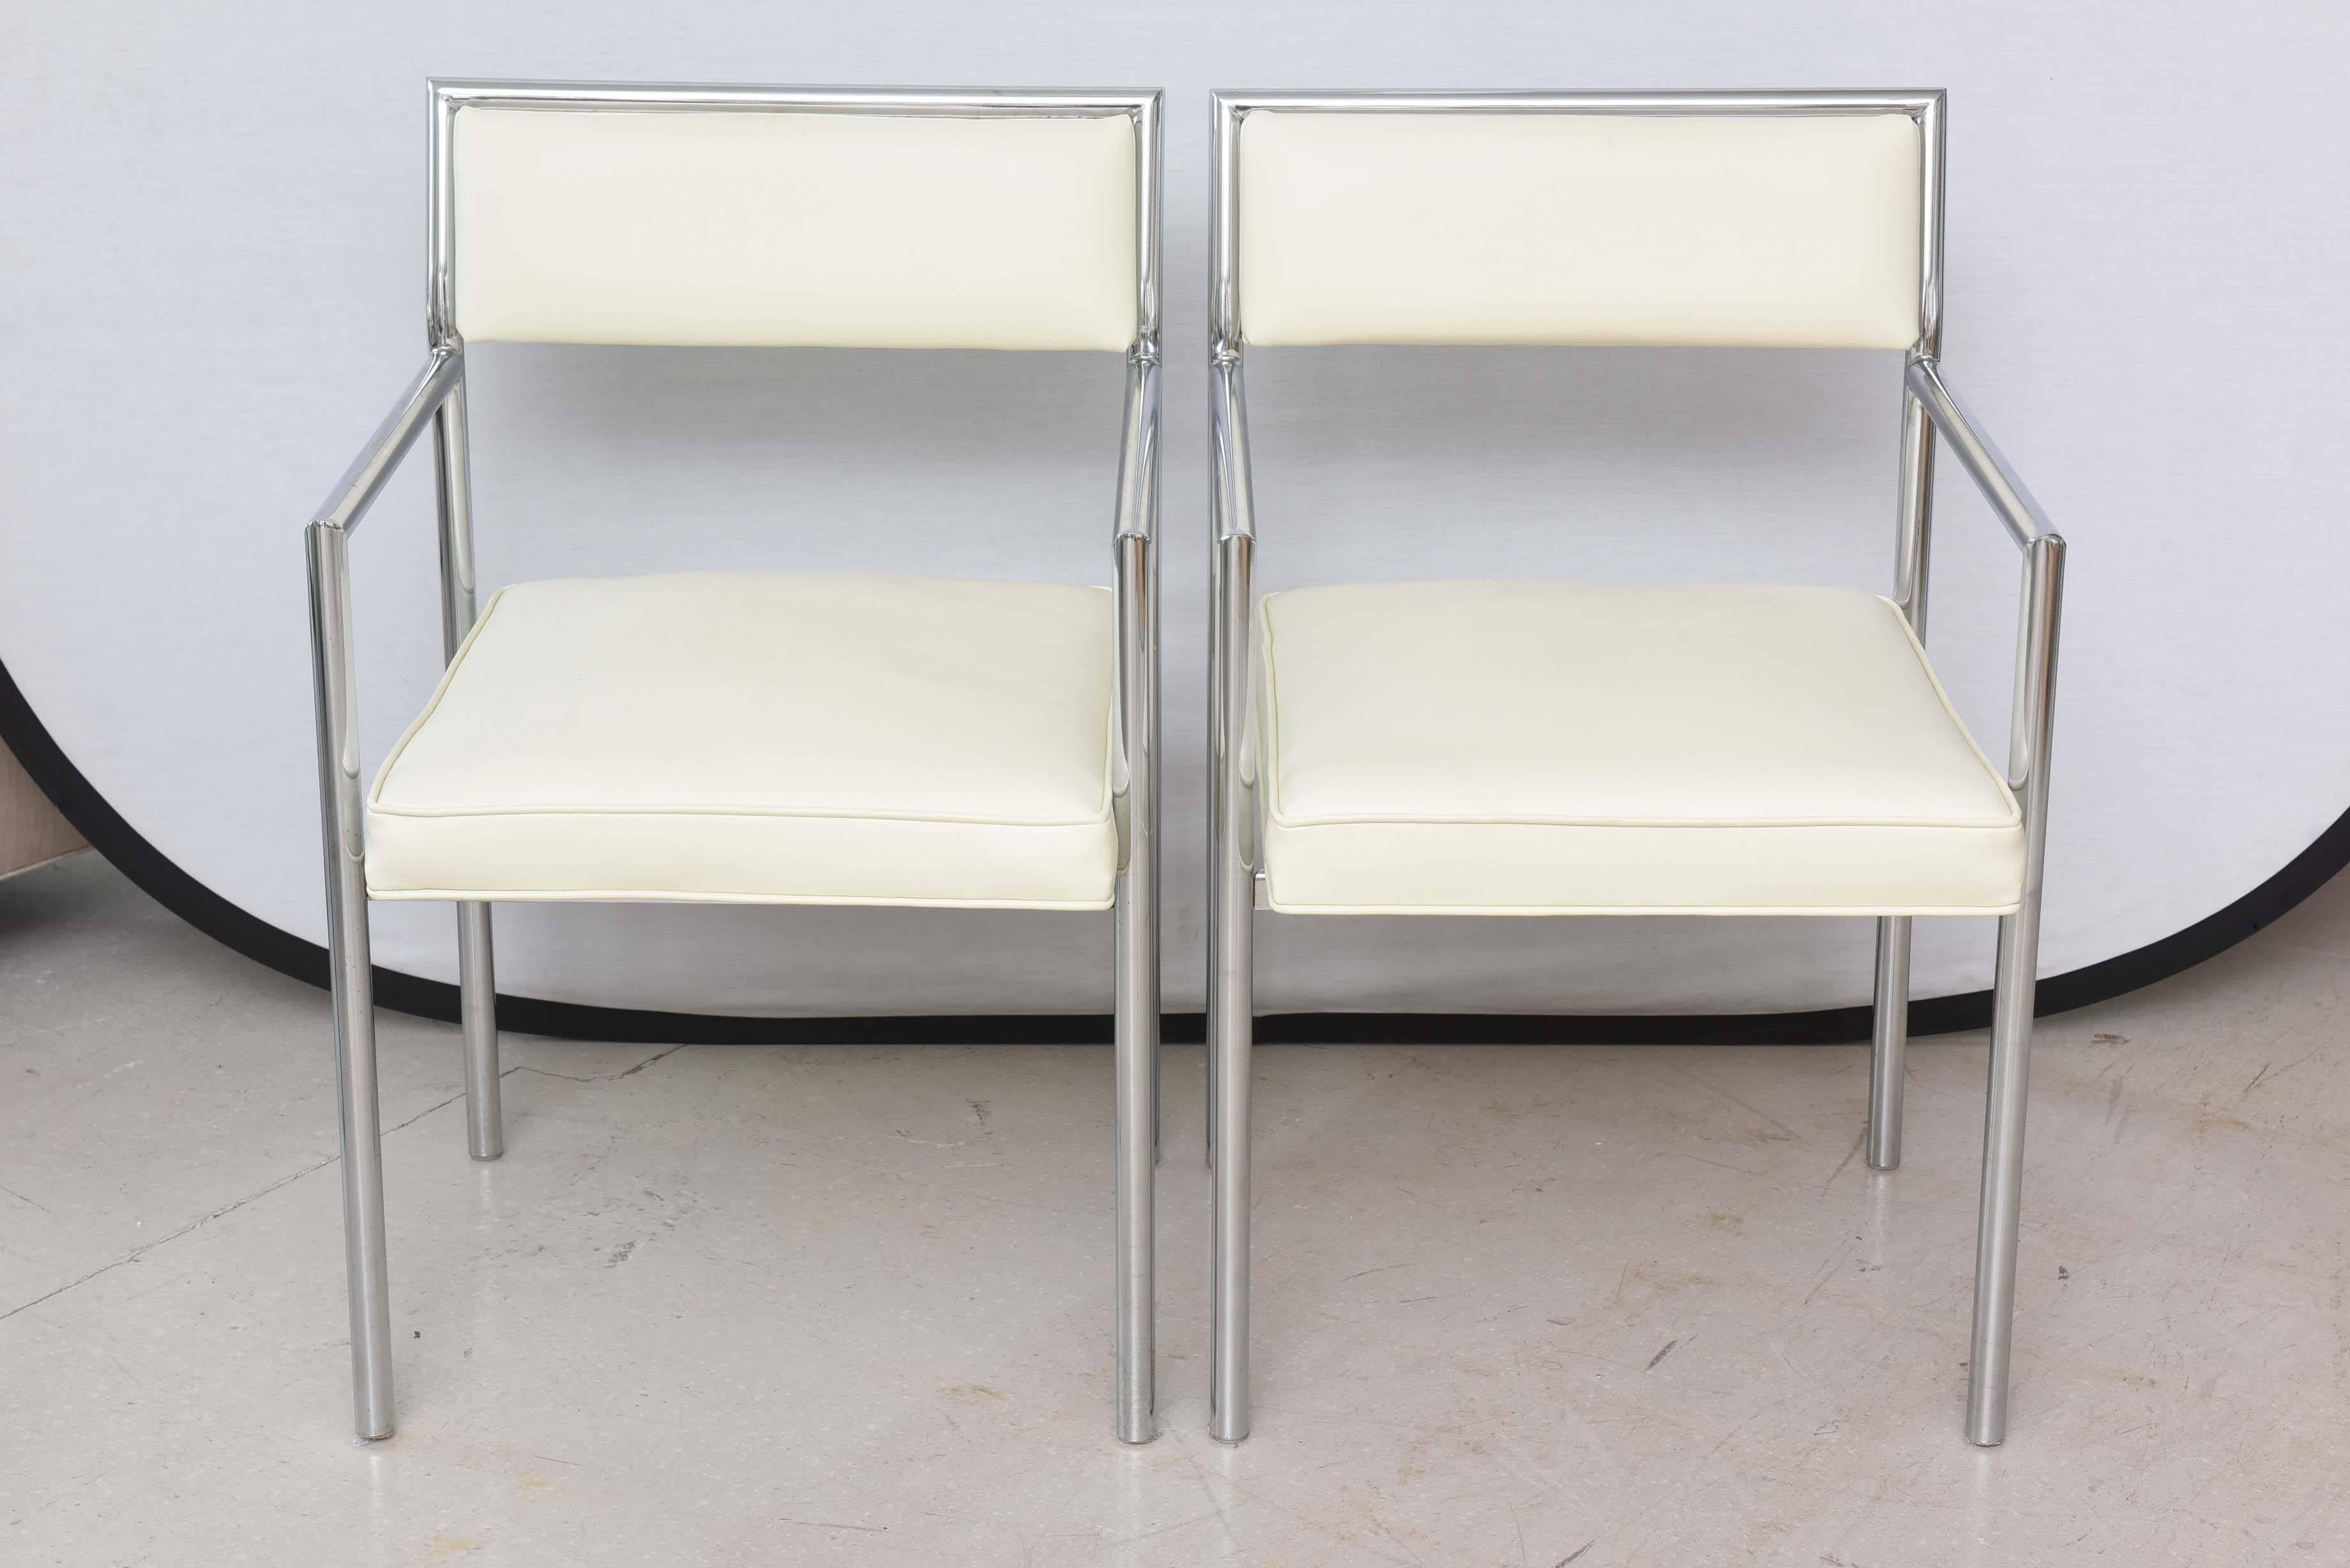 Set of six streamline chrome and white upholstered chairs by Design Institute of America.